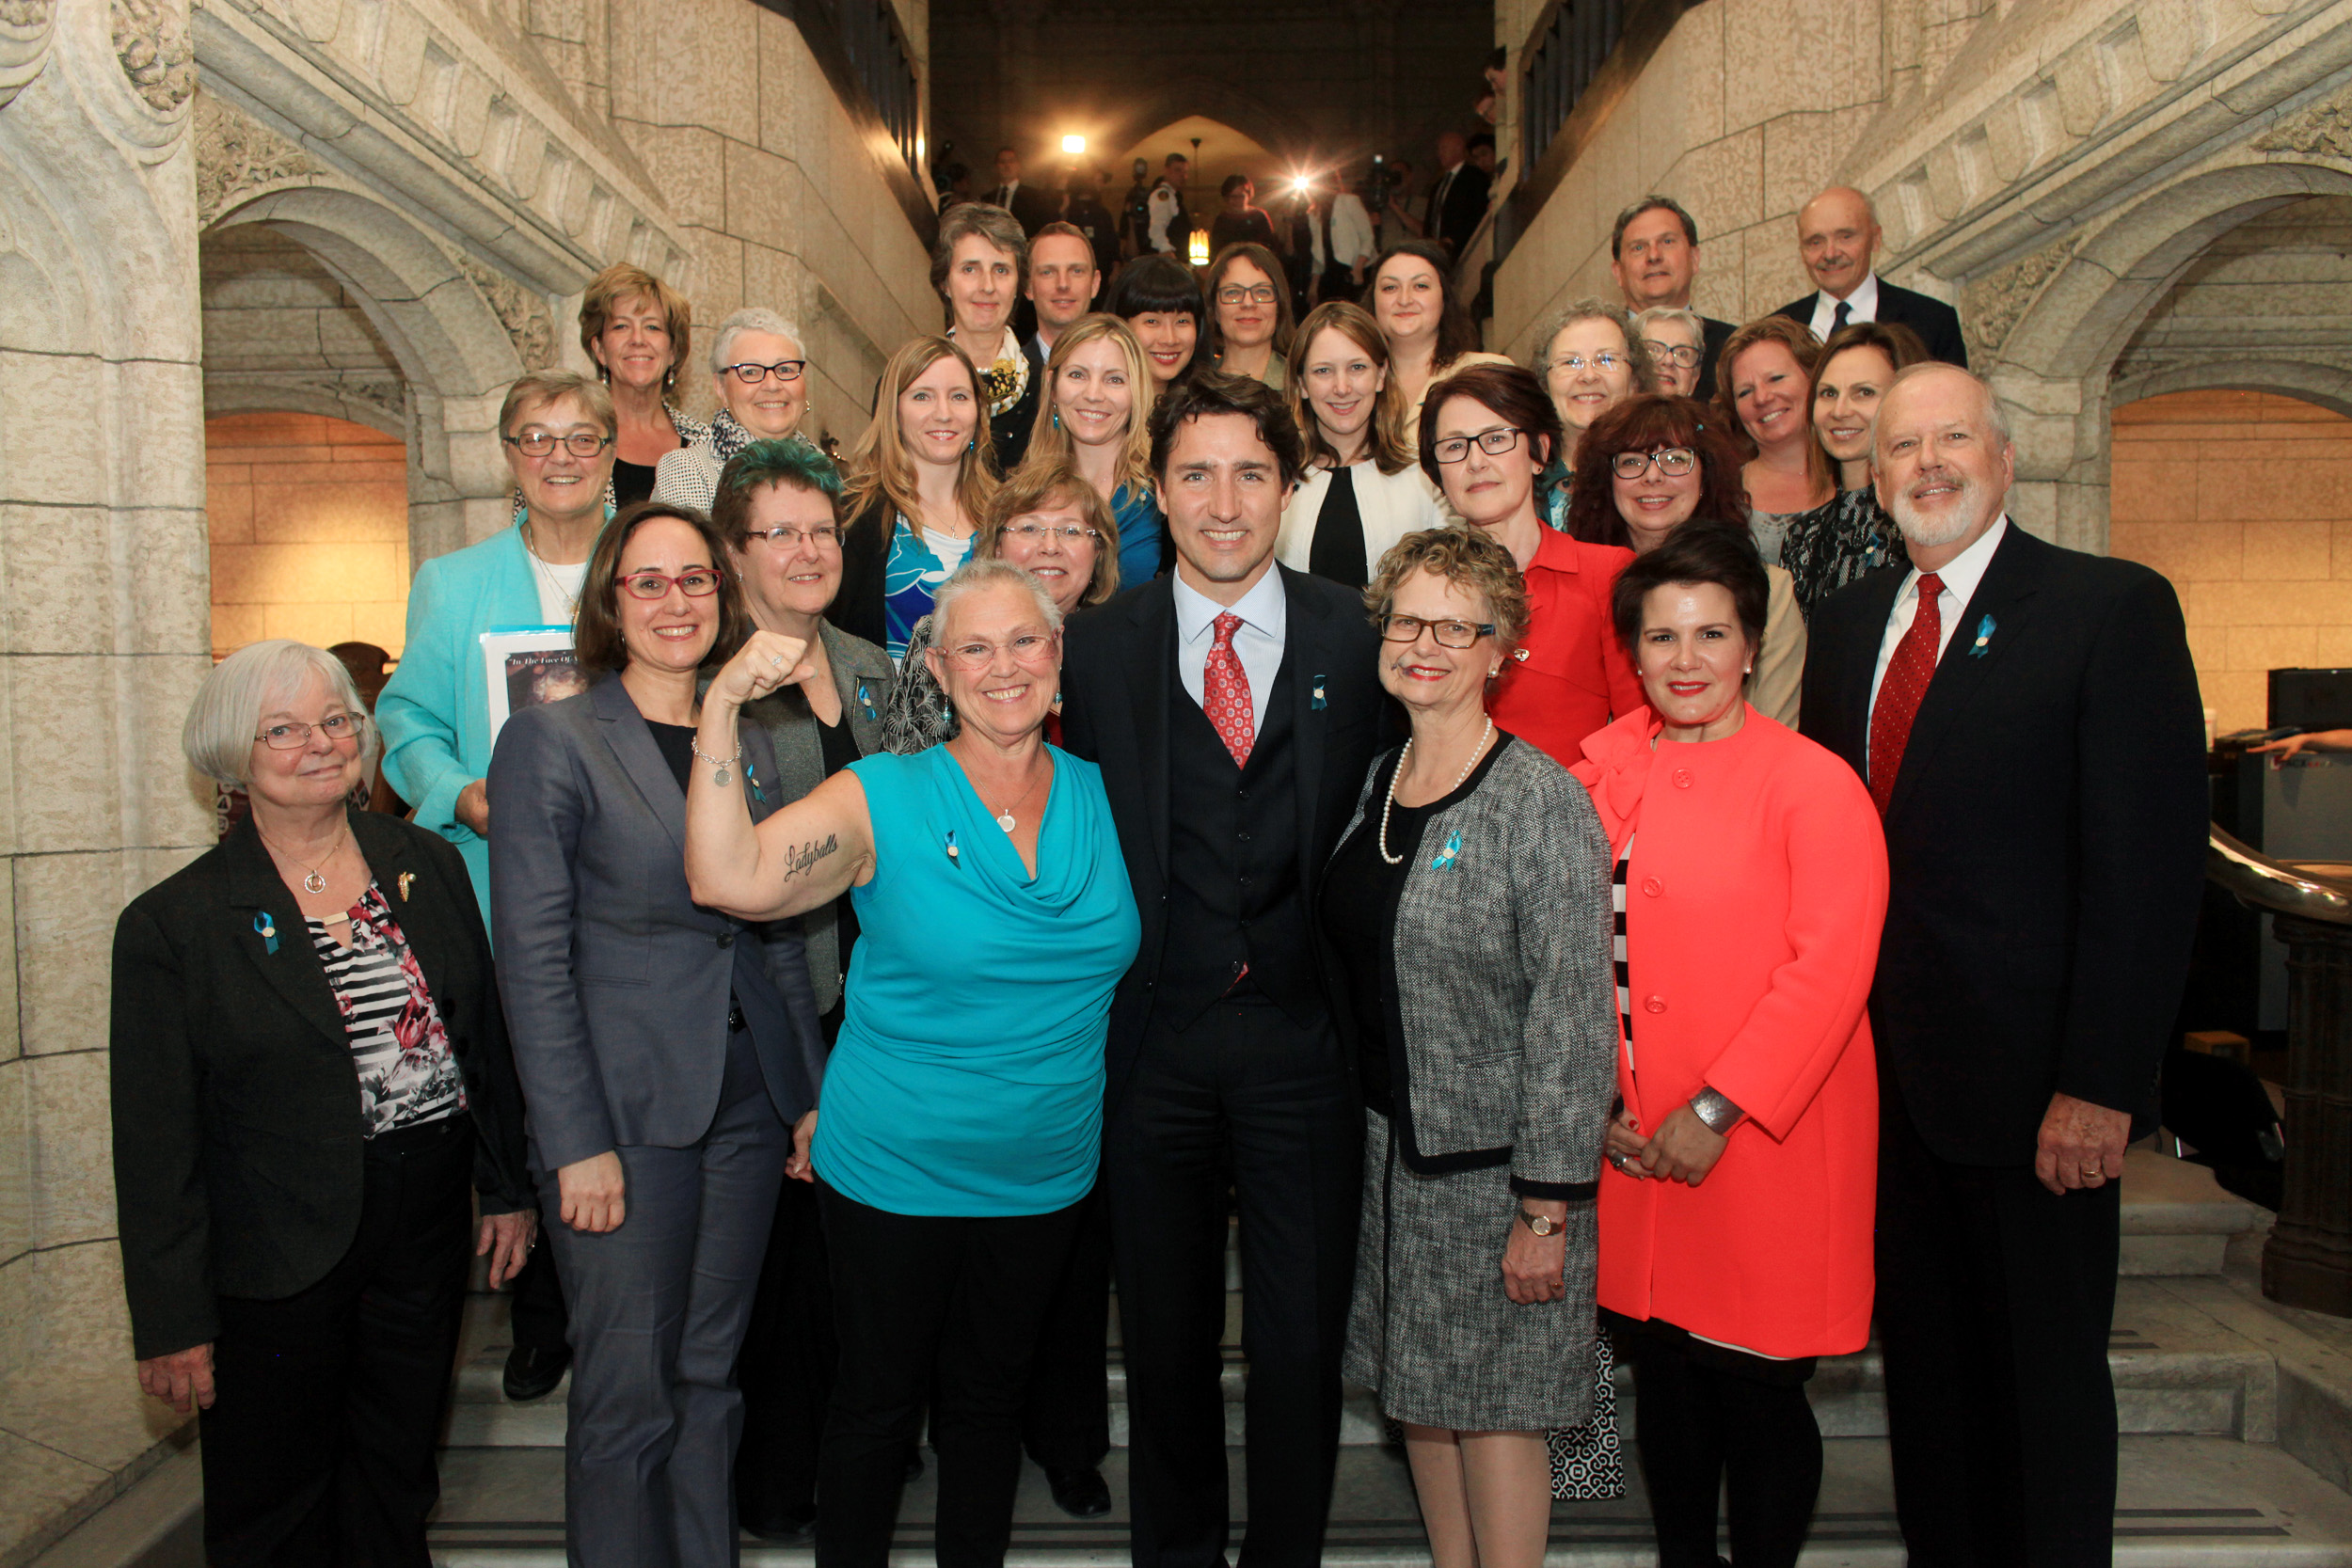 Ovarian Cancer Canada meeting with Prime Minister Justin Trudeau on Parliament Hill in Ottawa